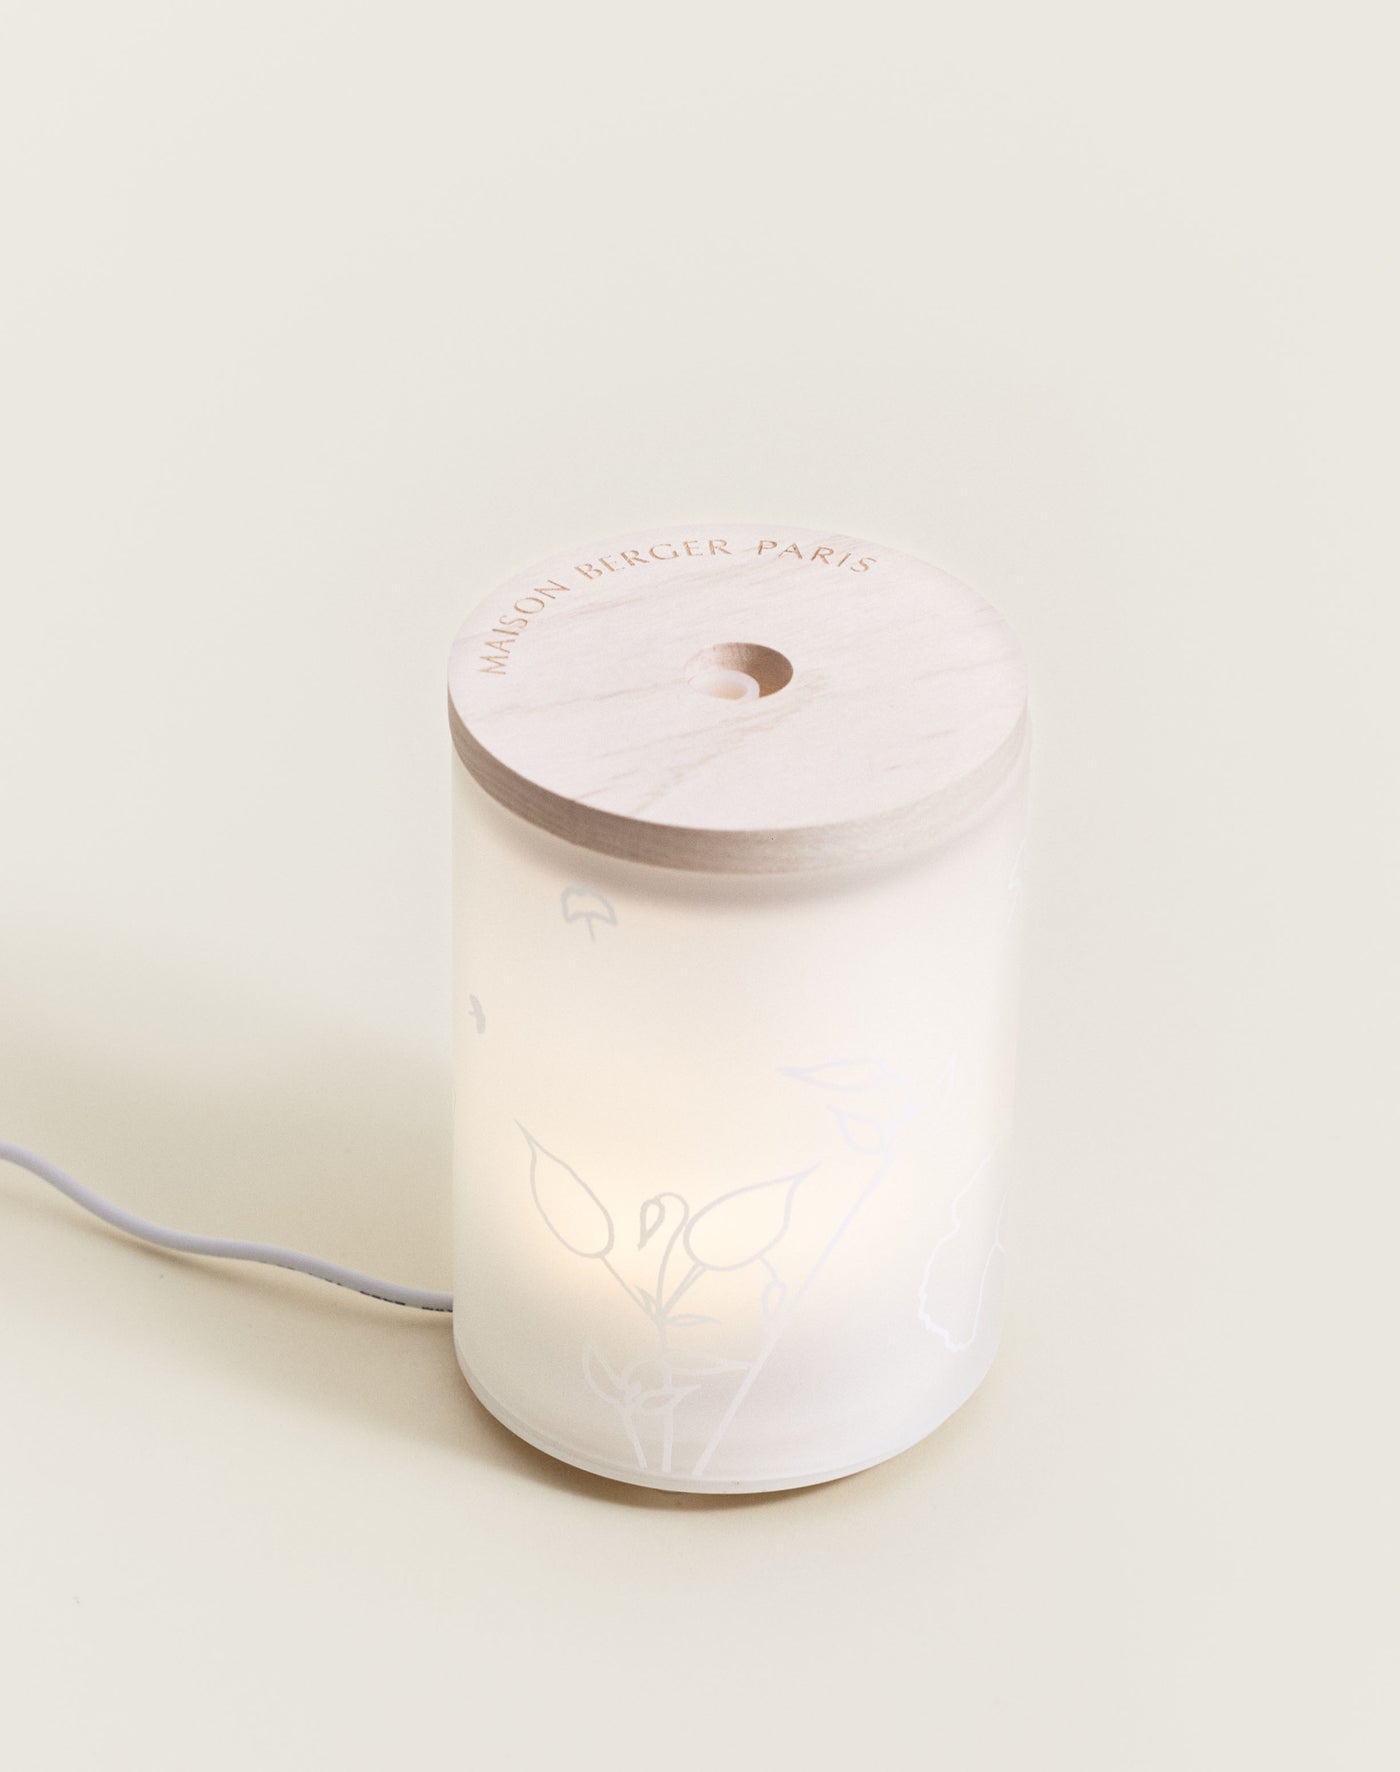 Aroma Relax Mist Diffuser